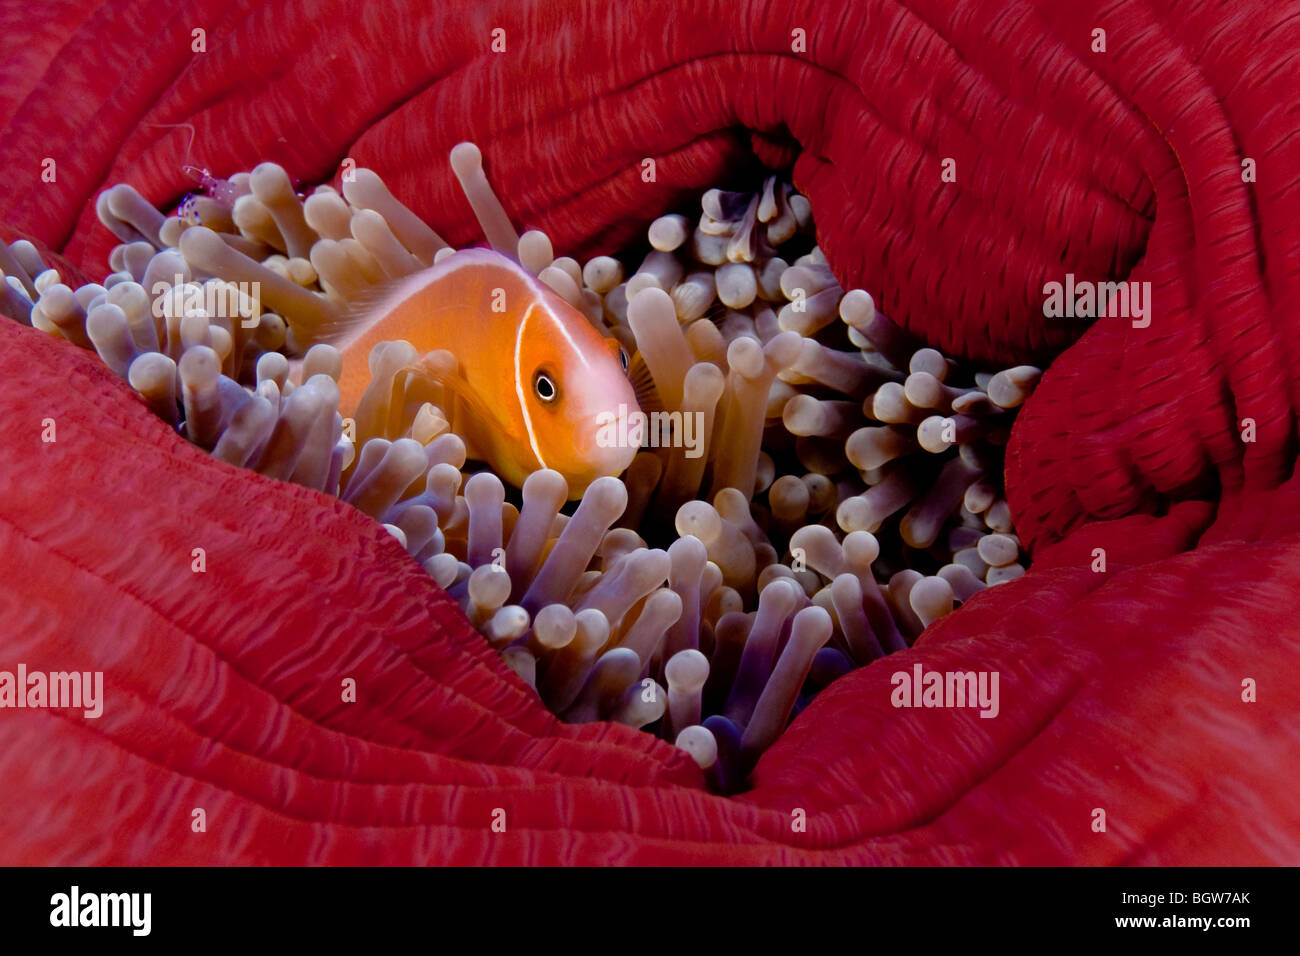 Anemone fish inside of an anemone, Palau, coral reef, tropical reef, colorful, Micronesia, ocean, sea, scuba, diving, sea life Stock Photo